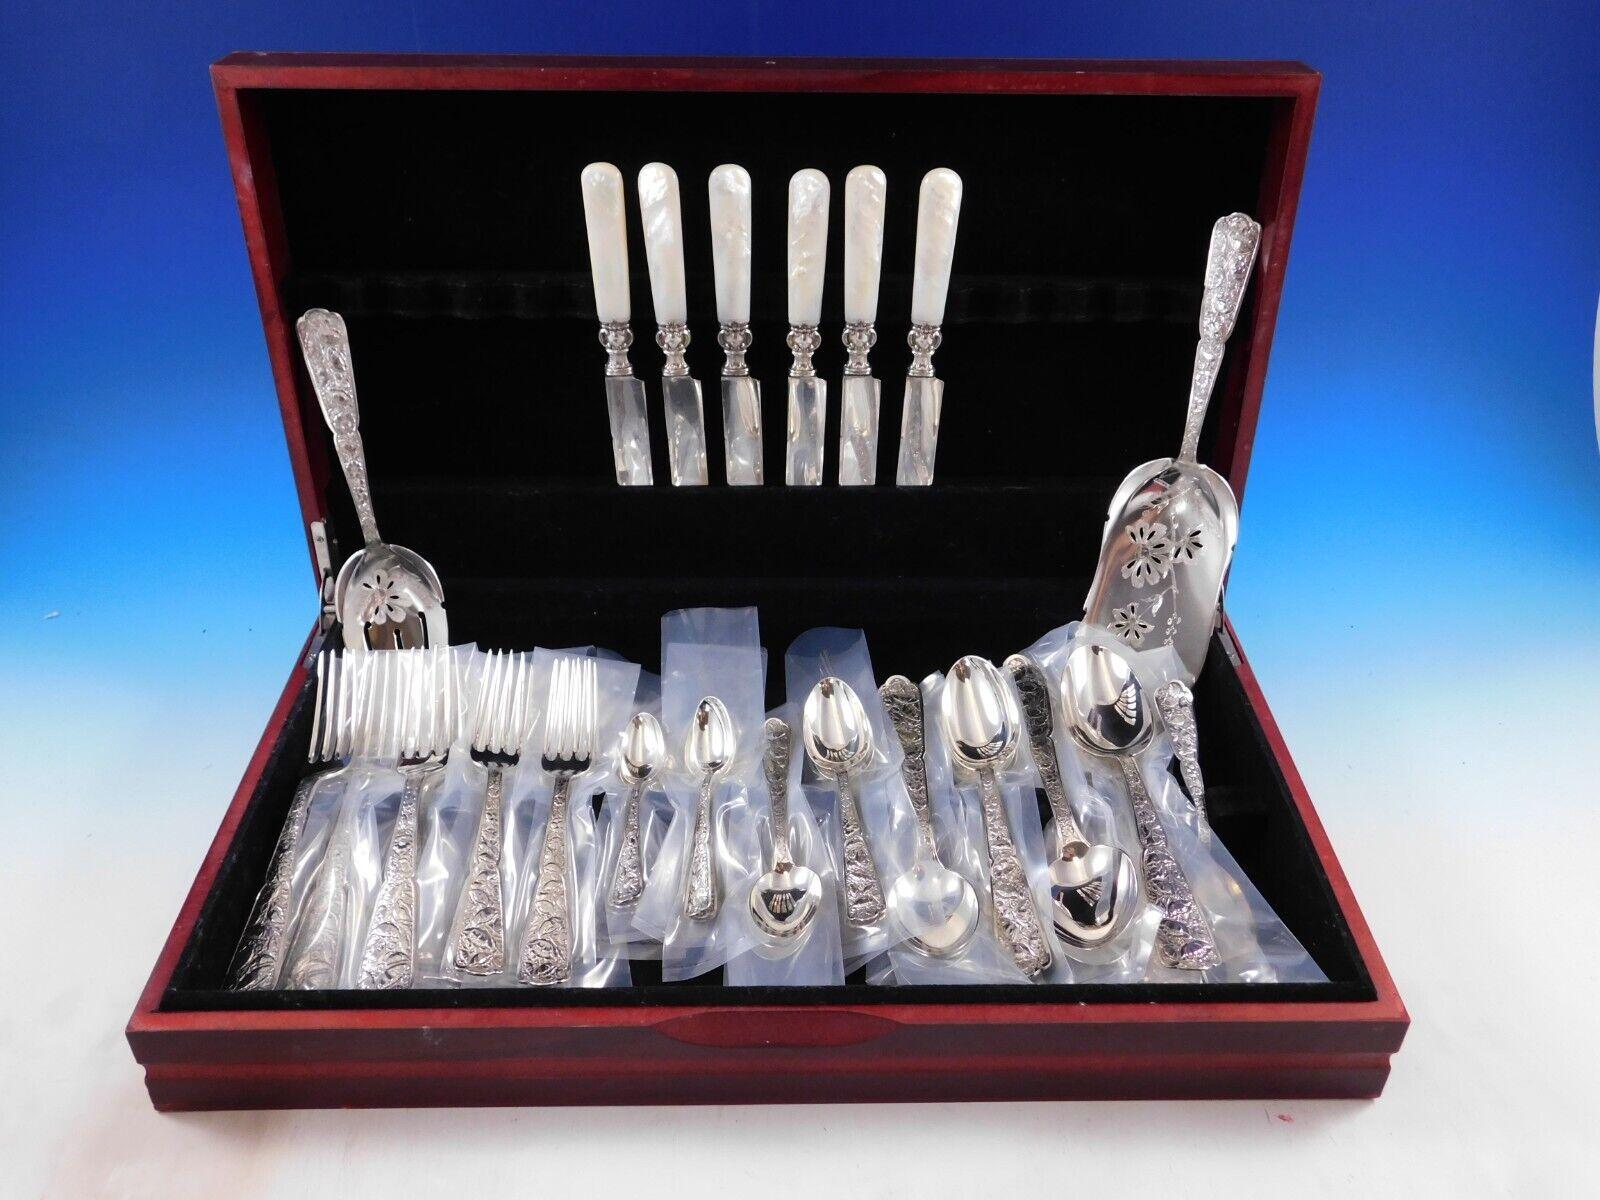 Exceedingly rare Byzantine by Wood & Hughes, circa 1875, multi-motif floral sterling silver Flatware set - 45 pieces (including Mother of Pearl knives). This set includes:


6 Knives, Mother of pearl handle, 8 3/4